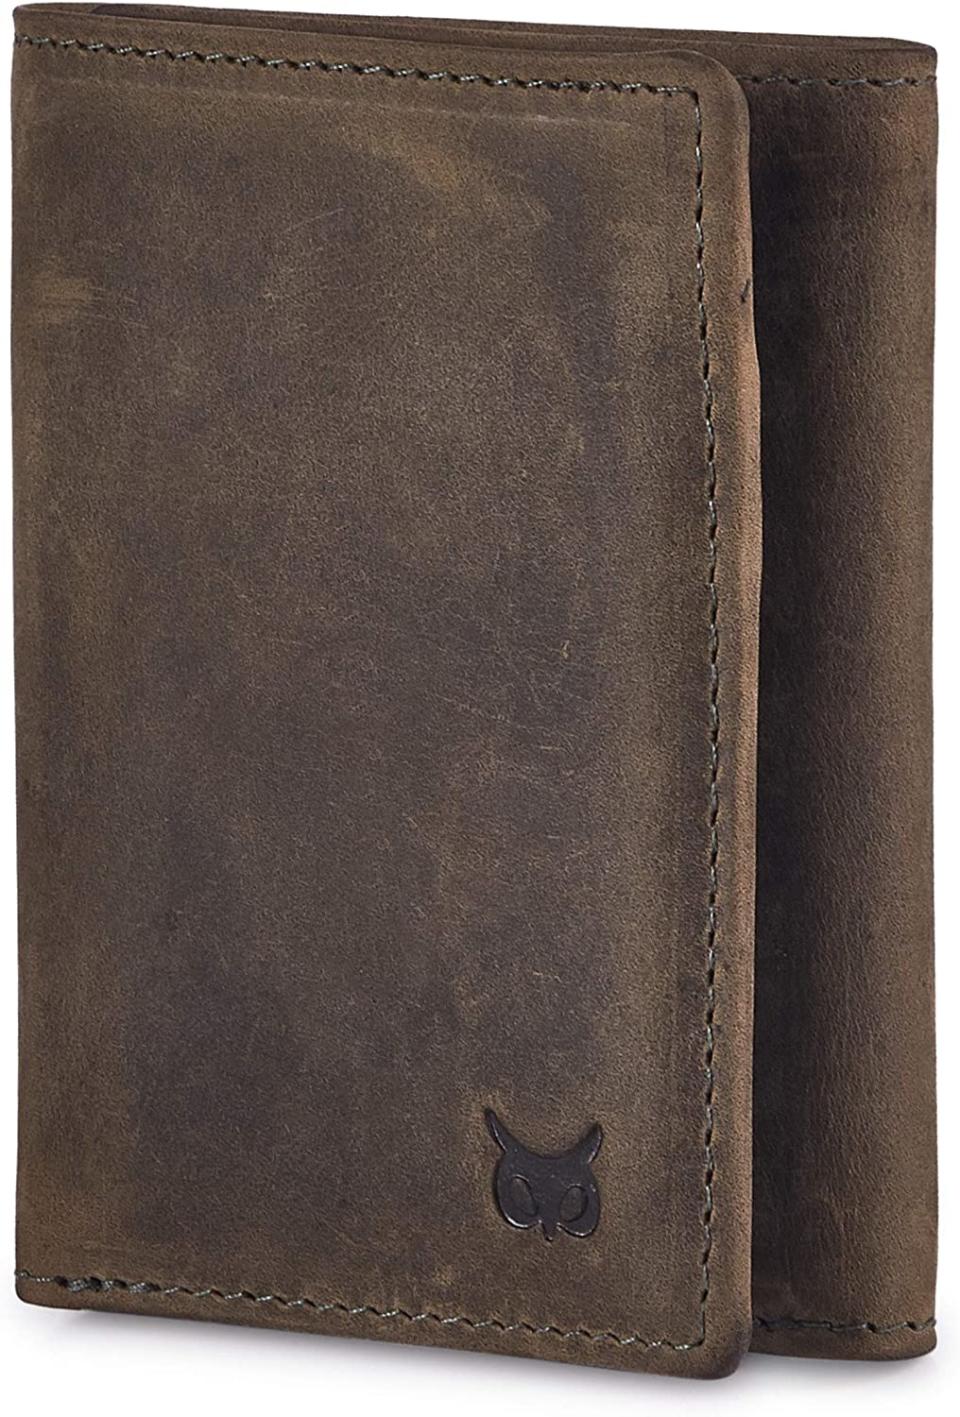 Wise Owl Accessories Genuine Leather Trifold Wallet. Image via Amazon.